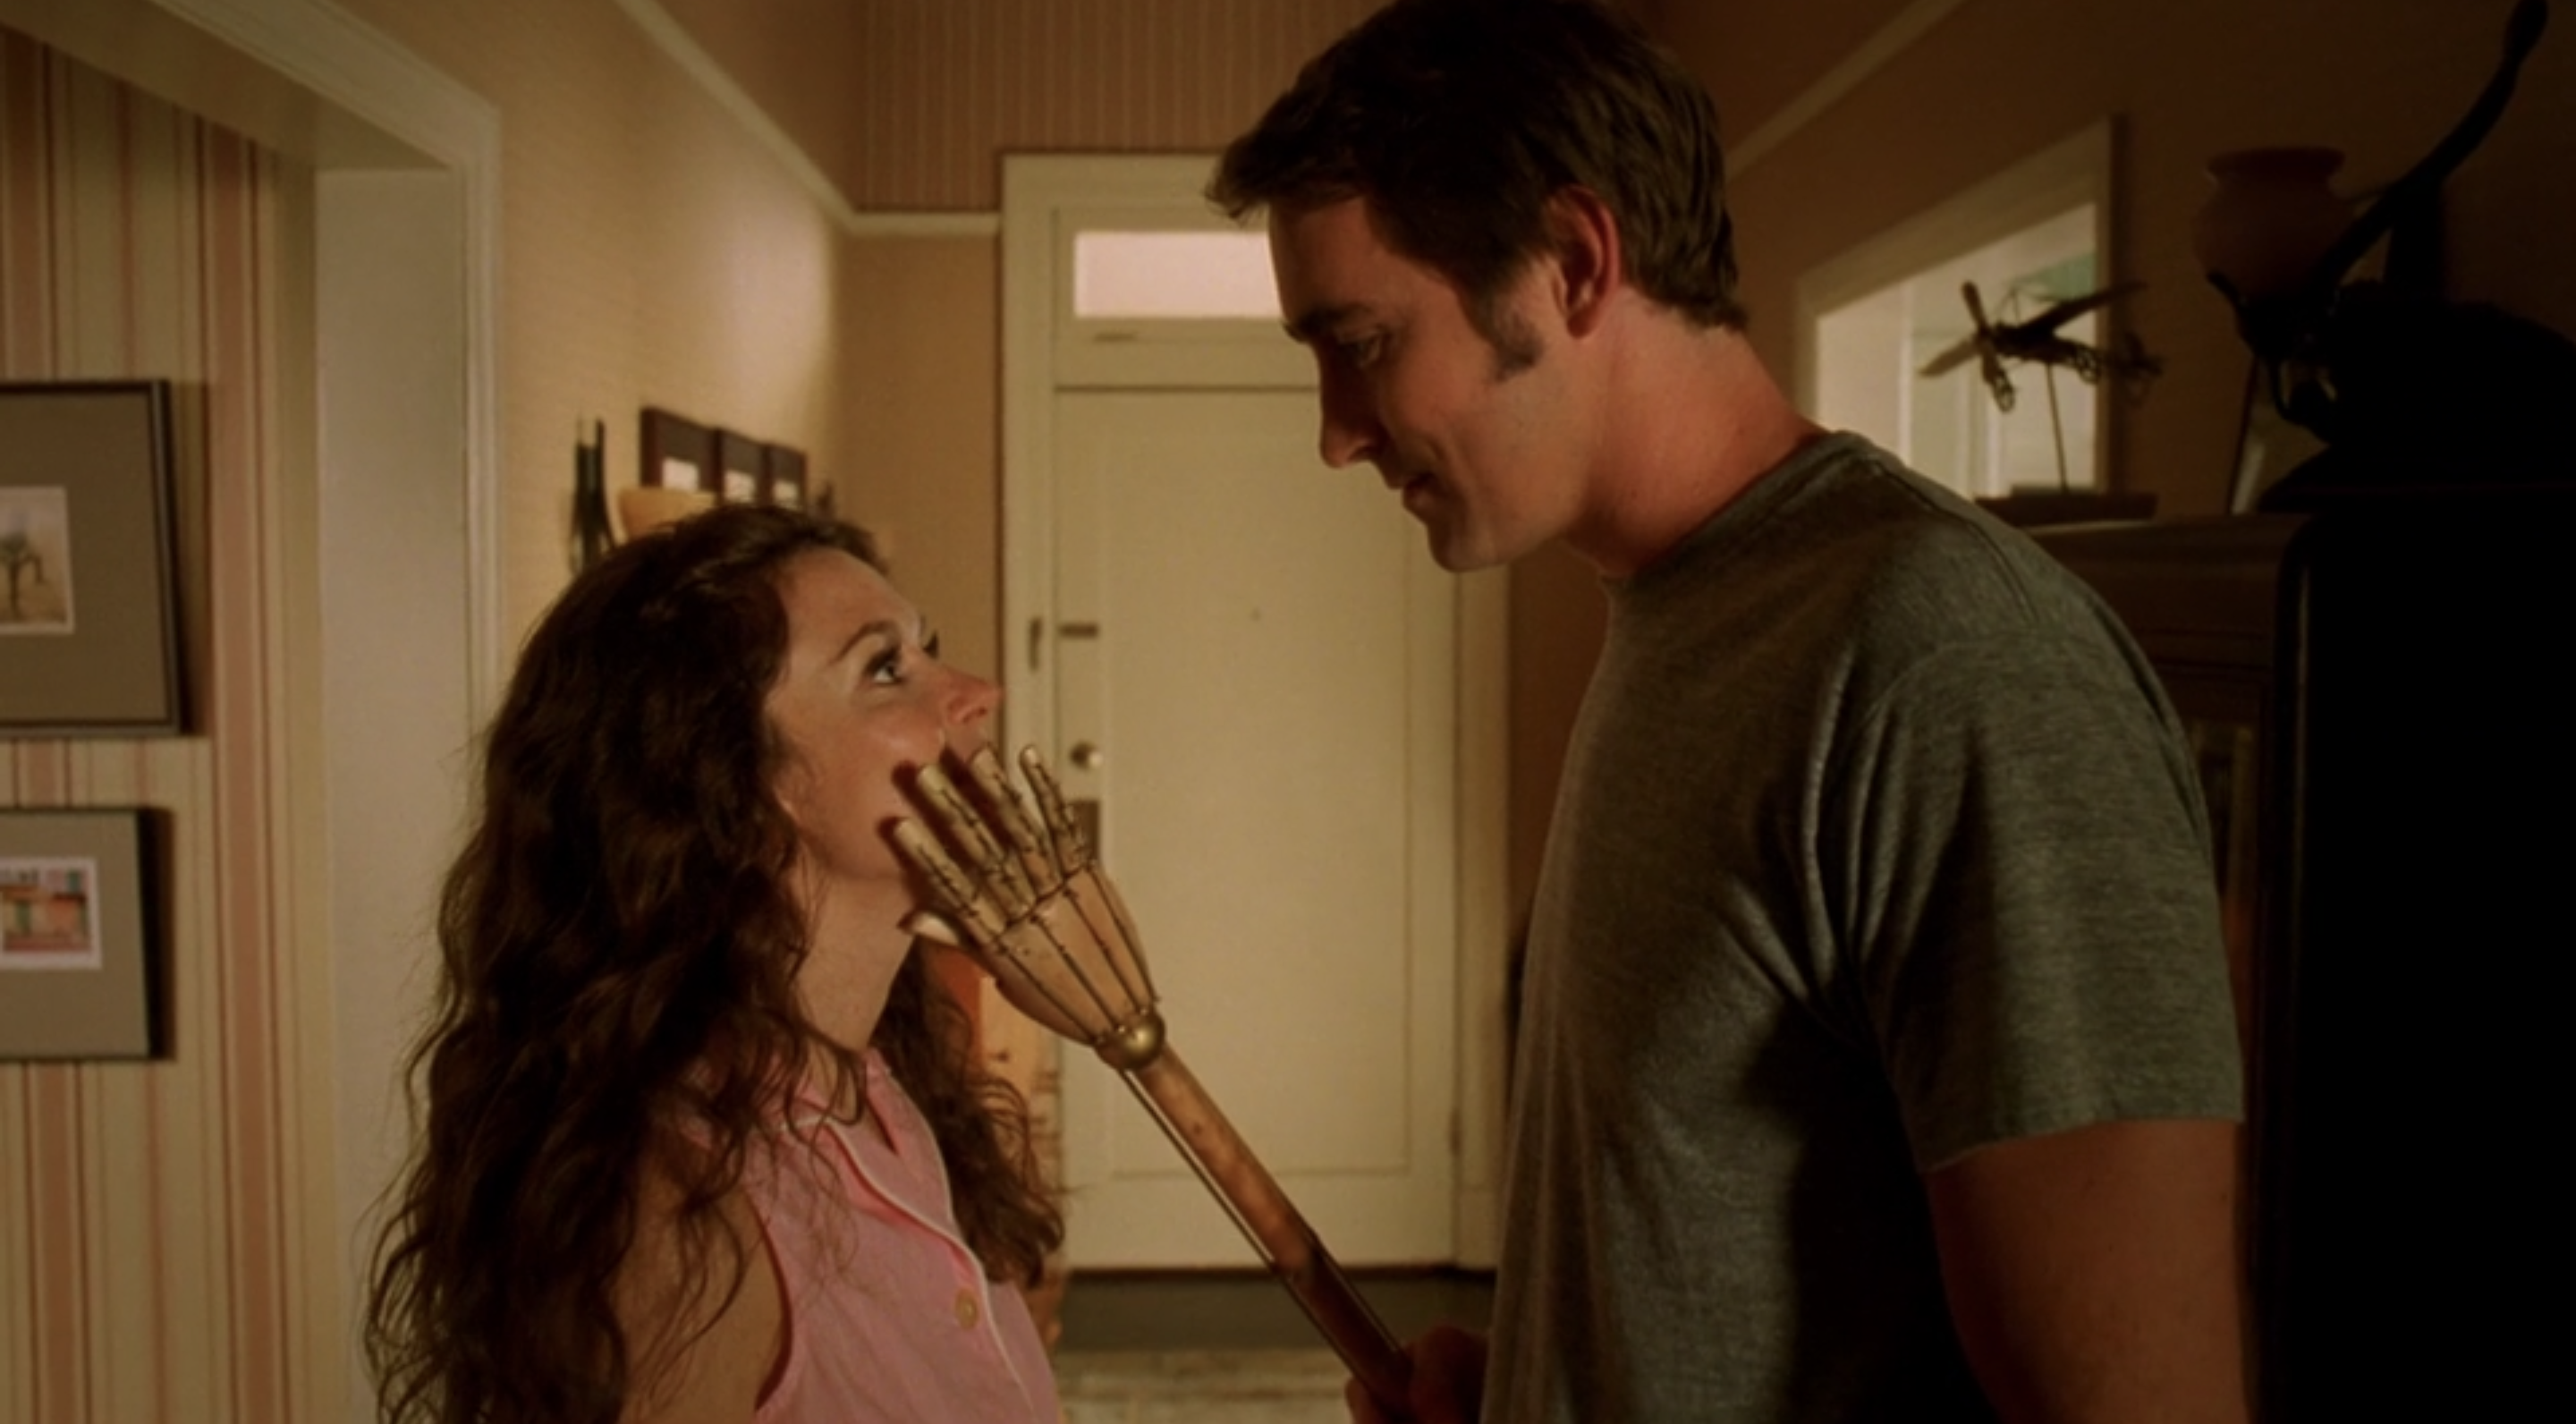 Ned touching Chuck’s face with a wooden hand in Pushing Daisies